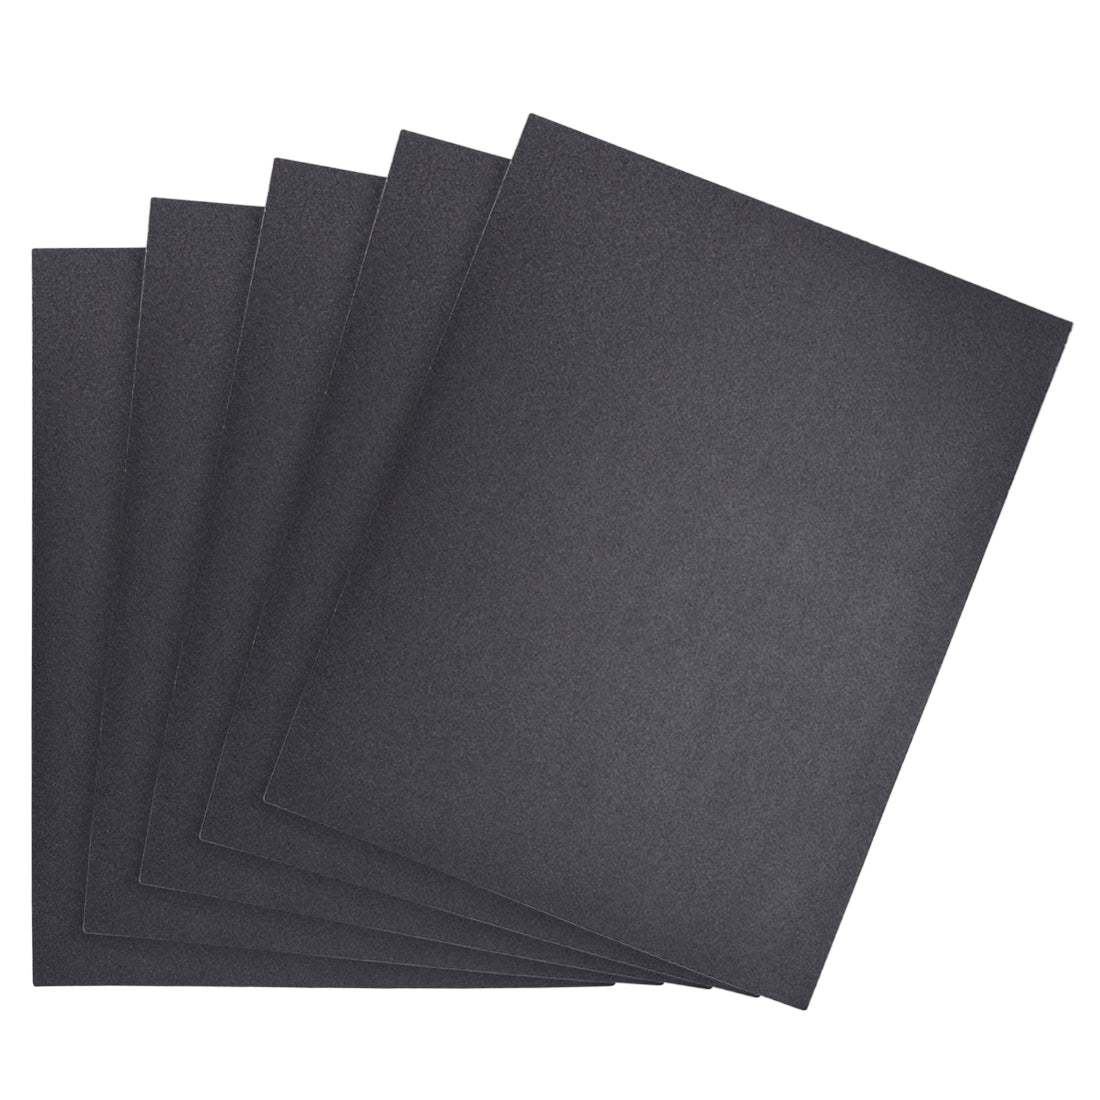 uxcell Uxcell Waterproof Sandpaper, Wet Dry Sand Paper Grit of 240, 11 x 9inch 5pcs